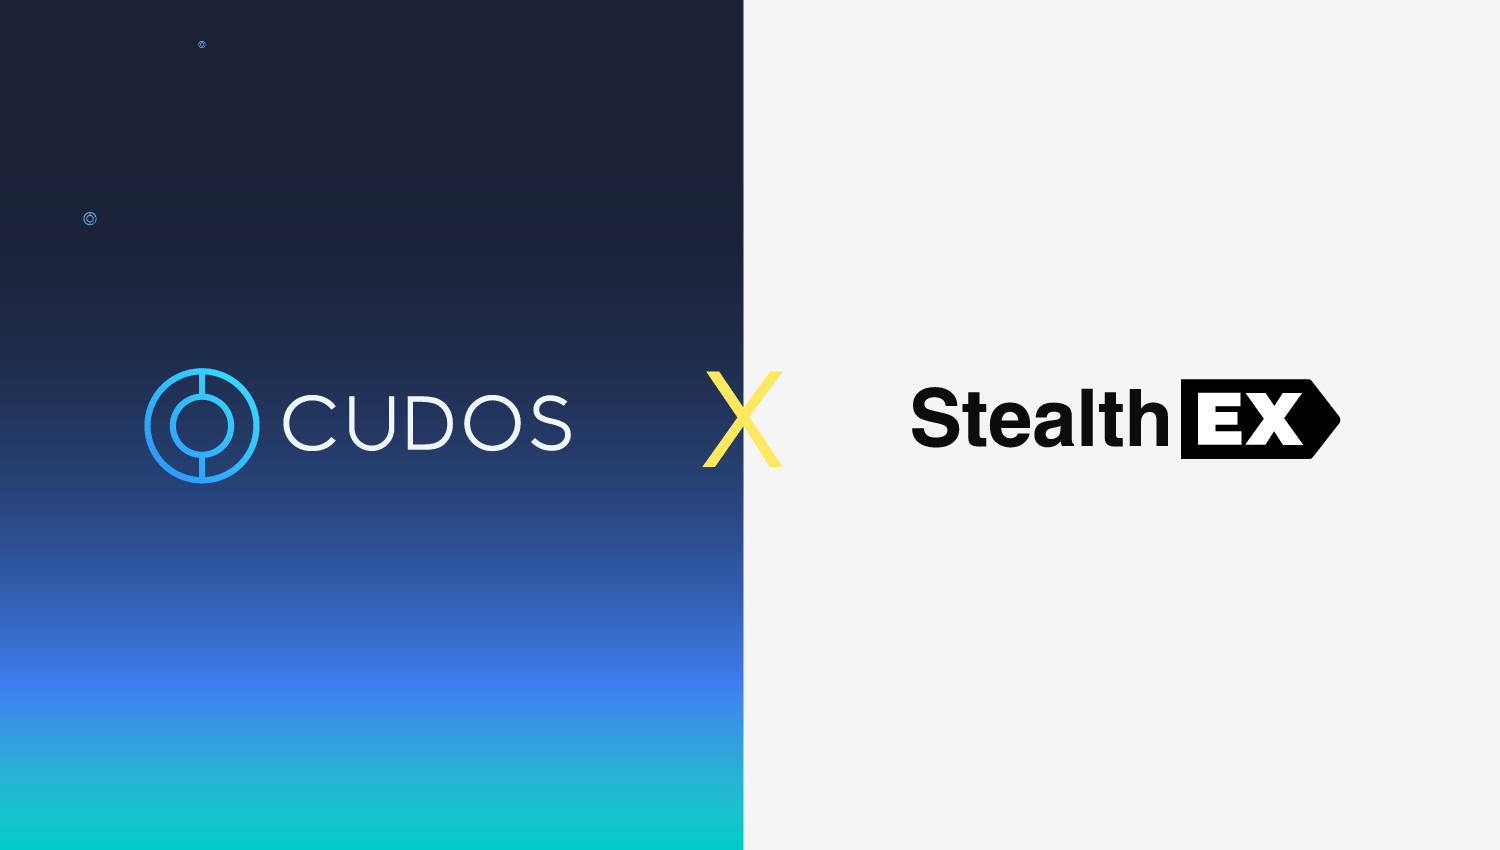 You can now exchange CUDOS tokens on StealthEX